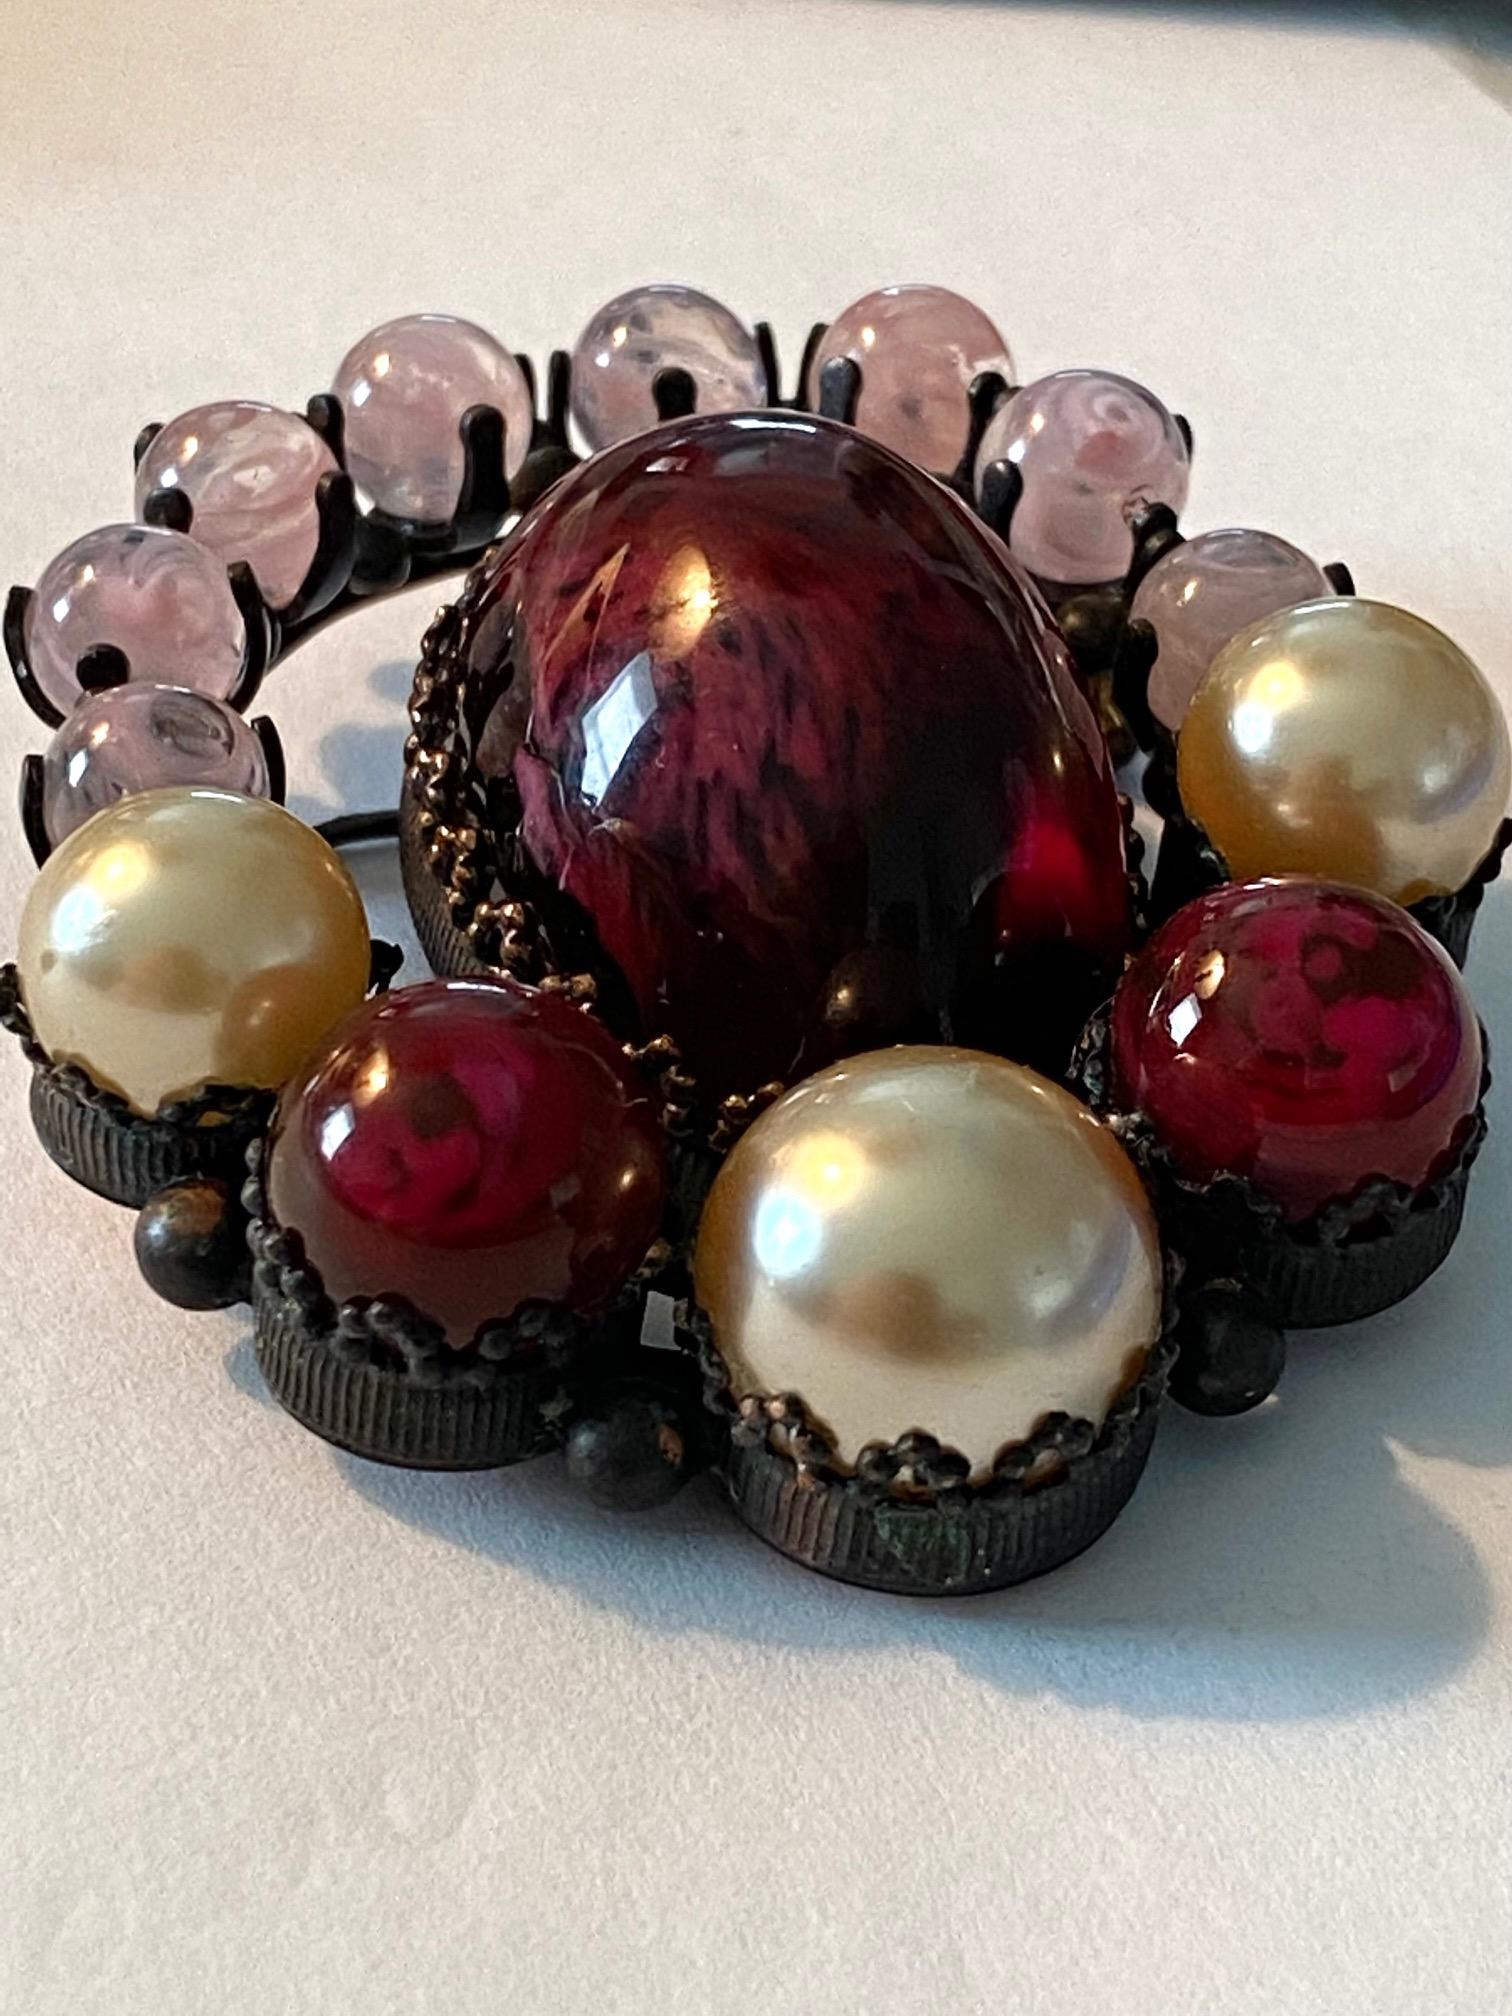 Women's or Men's Christian Dior 1960 Red, Pink & Pearl Cabochon Brooch, by Roger Scemama